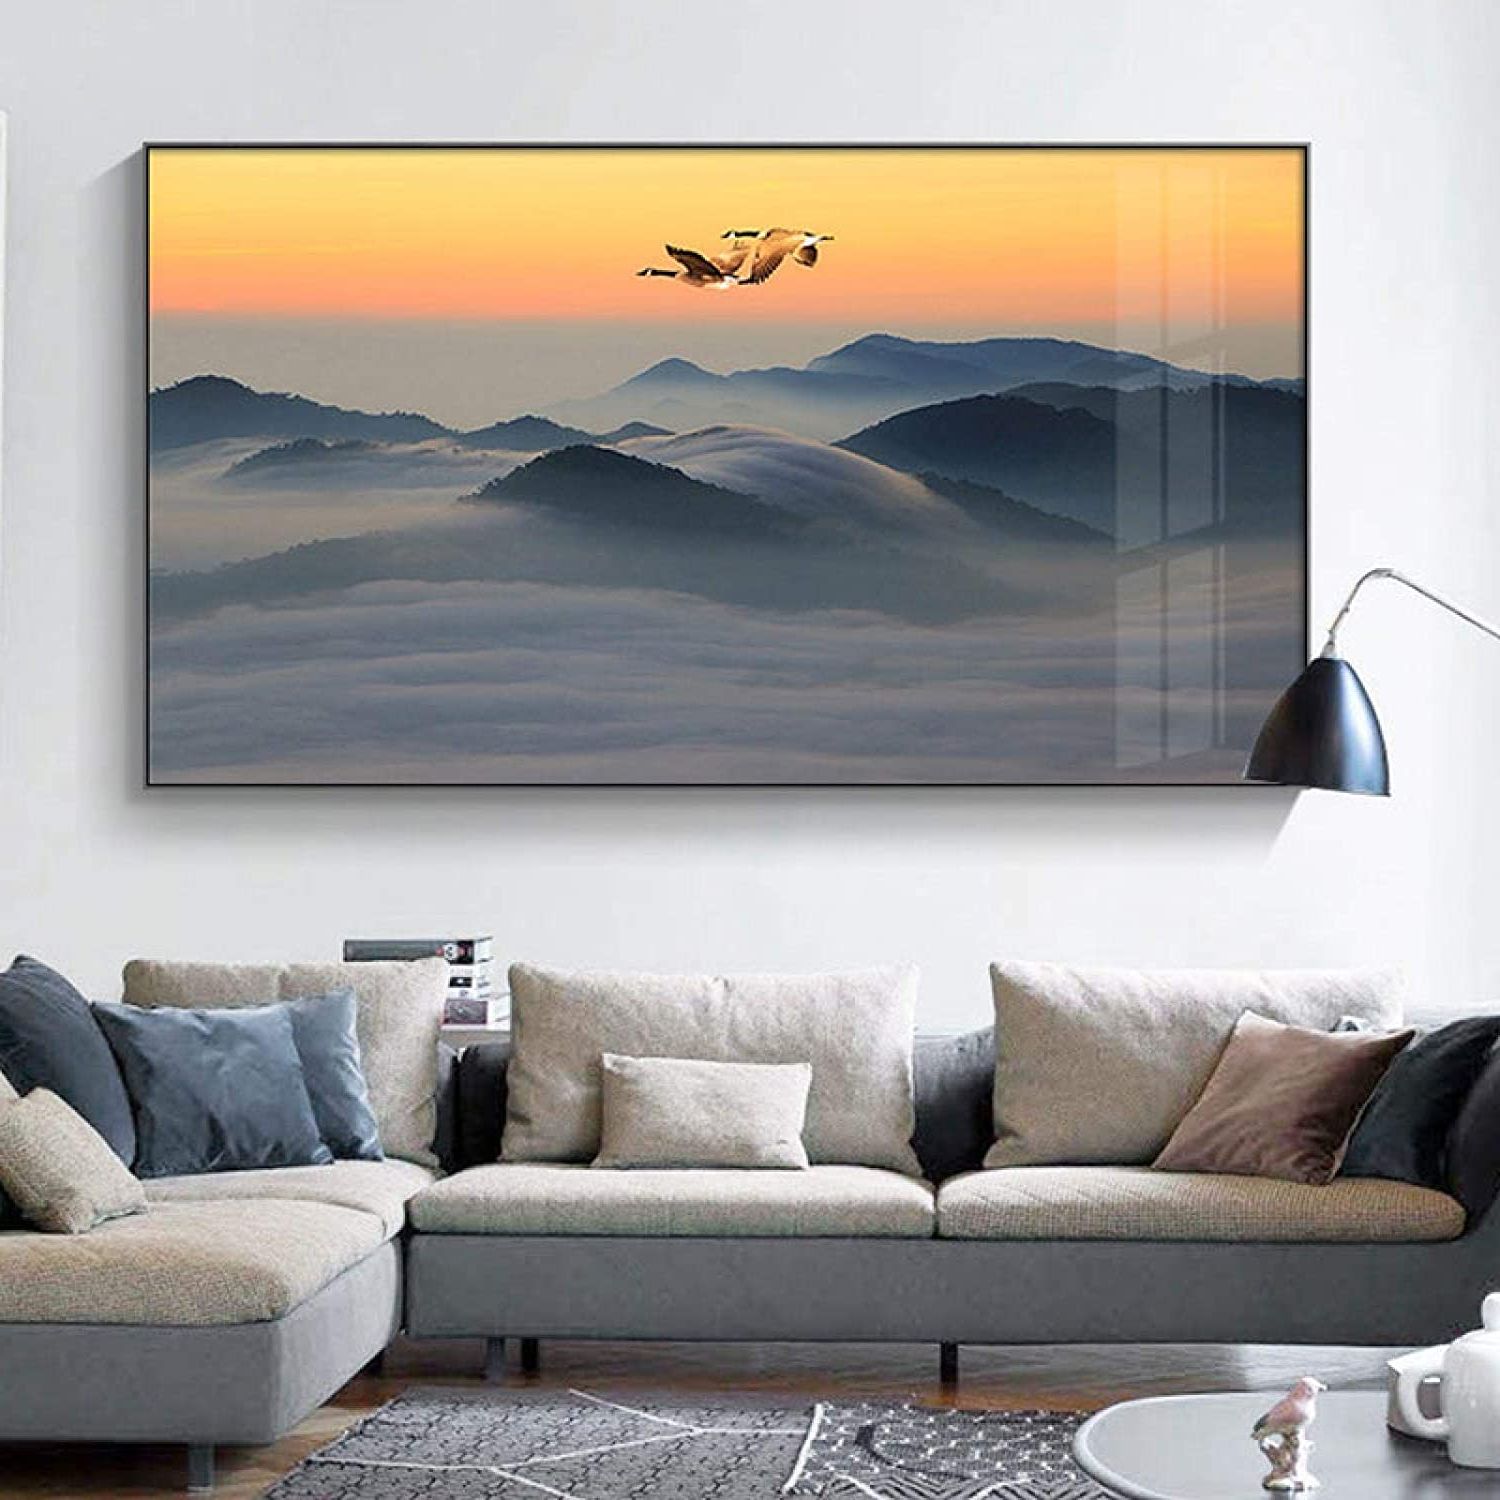 Most Recently Released Splendid Scenery Poster Sunrise Wall Pictures For Living Room Mountains  With Clouds And Birds Canvas Painting Modern Home Decoration Wall Art  Prints : Amazon (View 15 of 15)